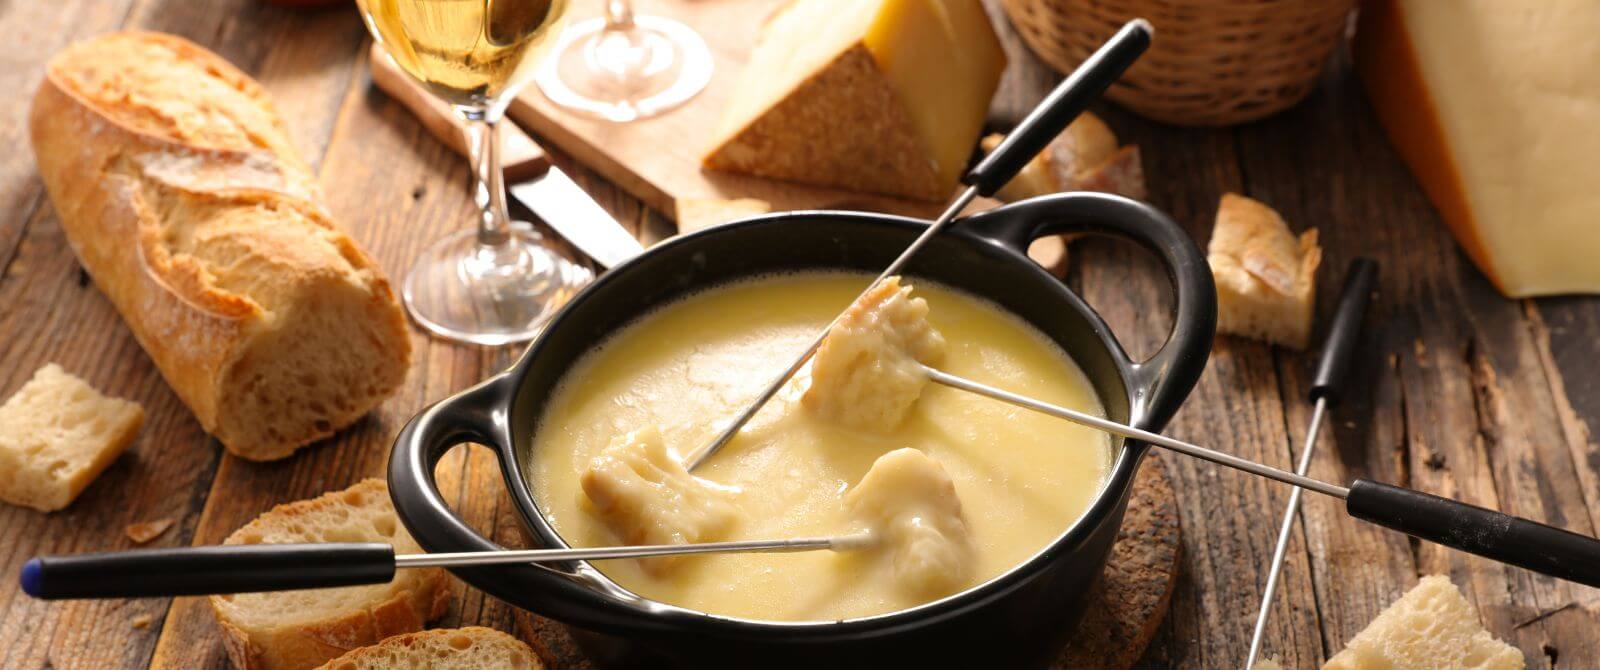 cheese fondue with bread and a wedge of cheese on the side